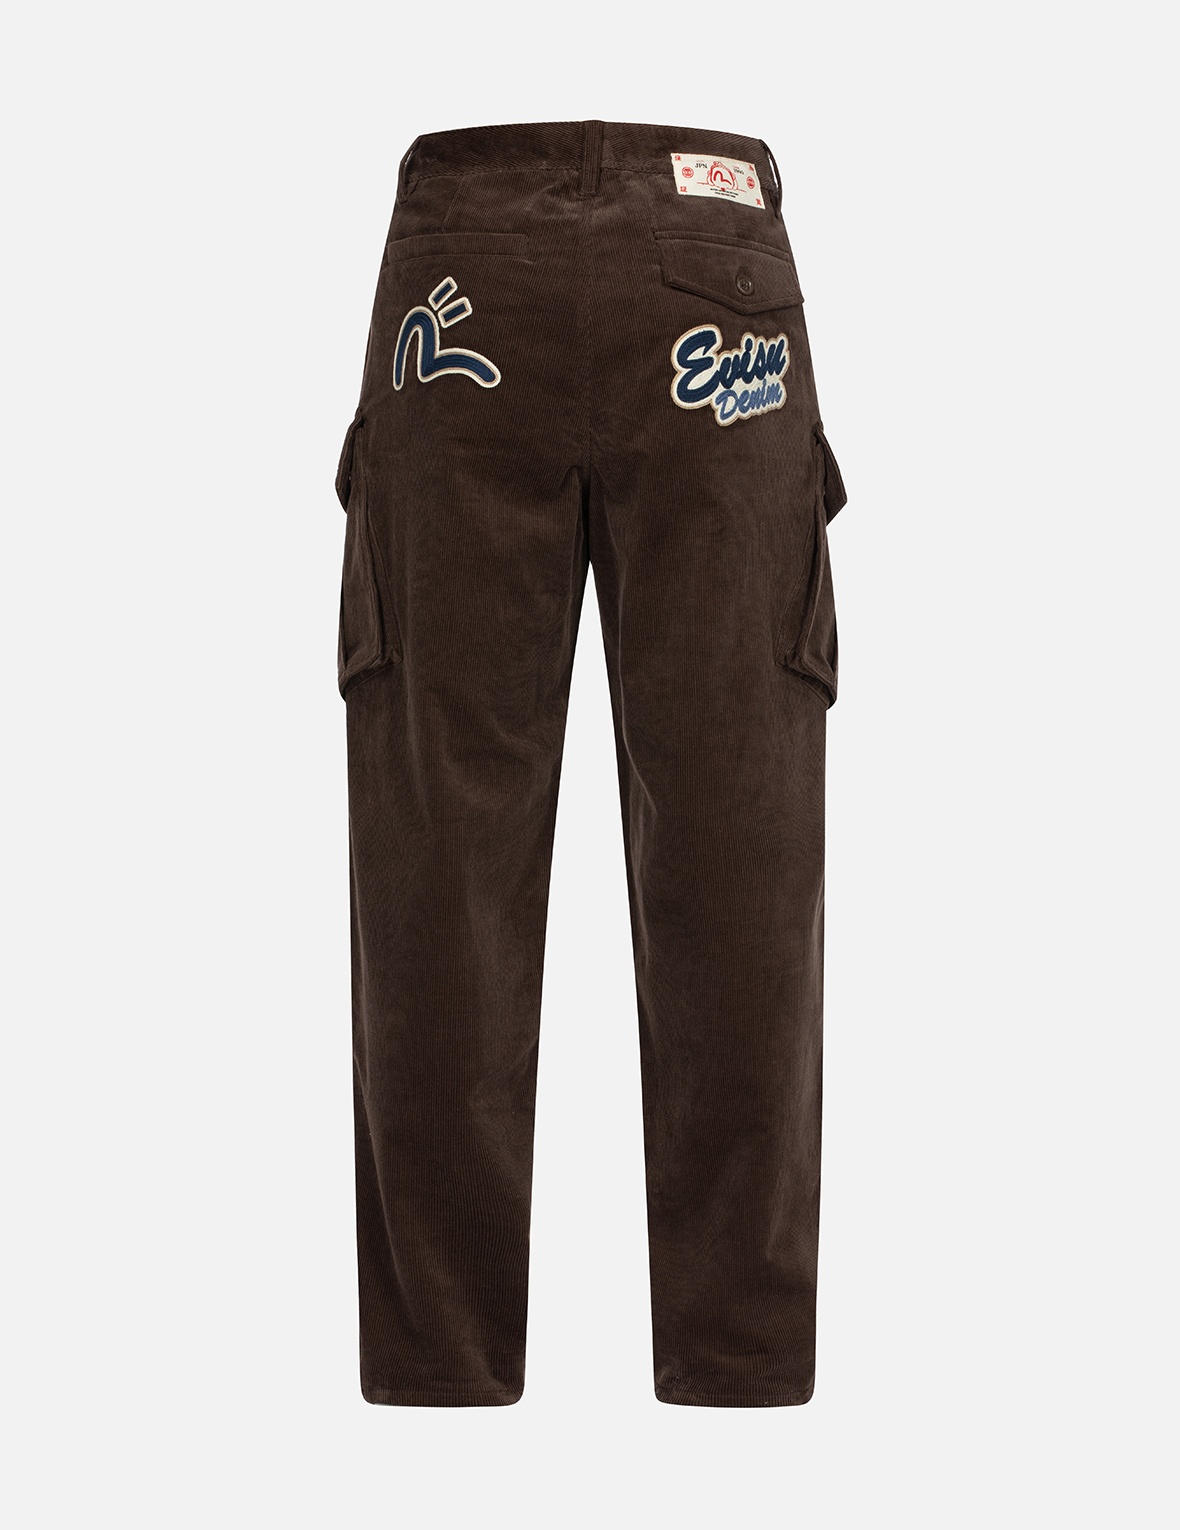 LOGO AND SEAGULL EMBROIDERY RELAX FIT CORDUROY PANTS - 1